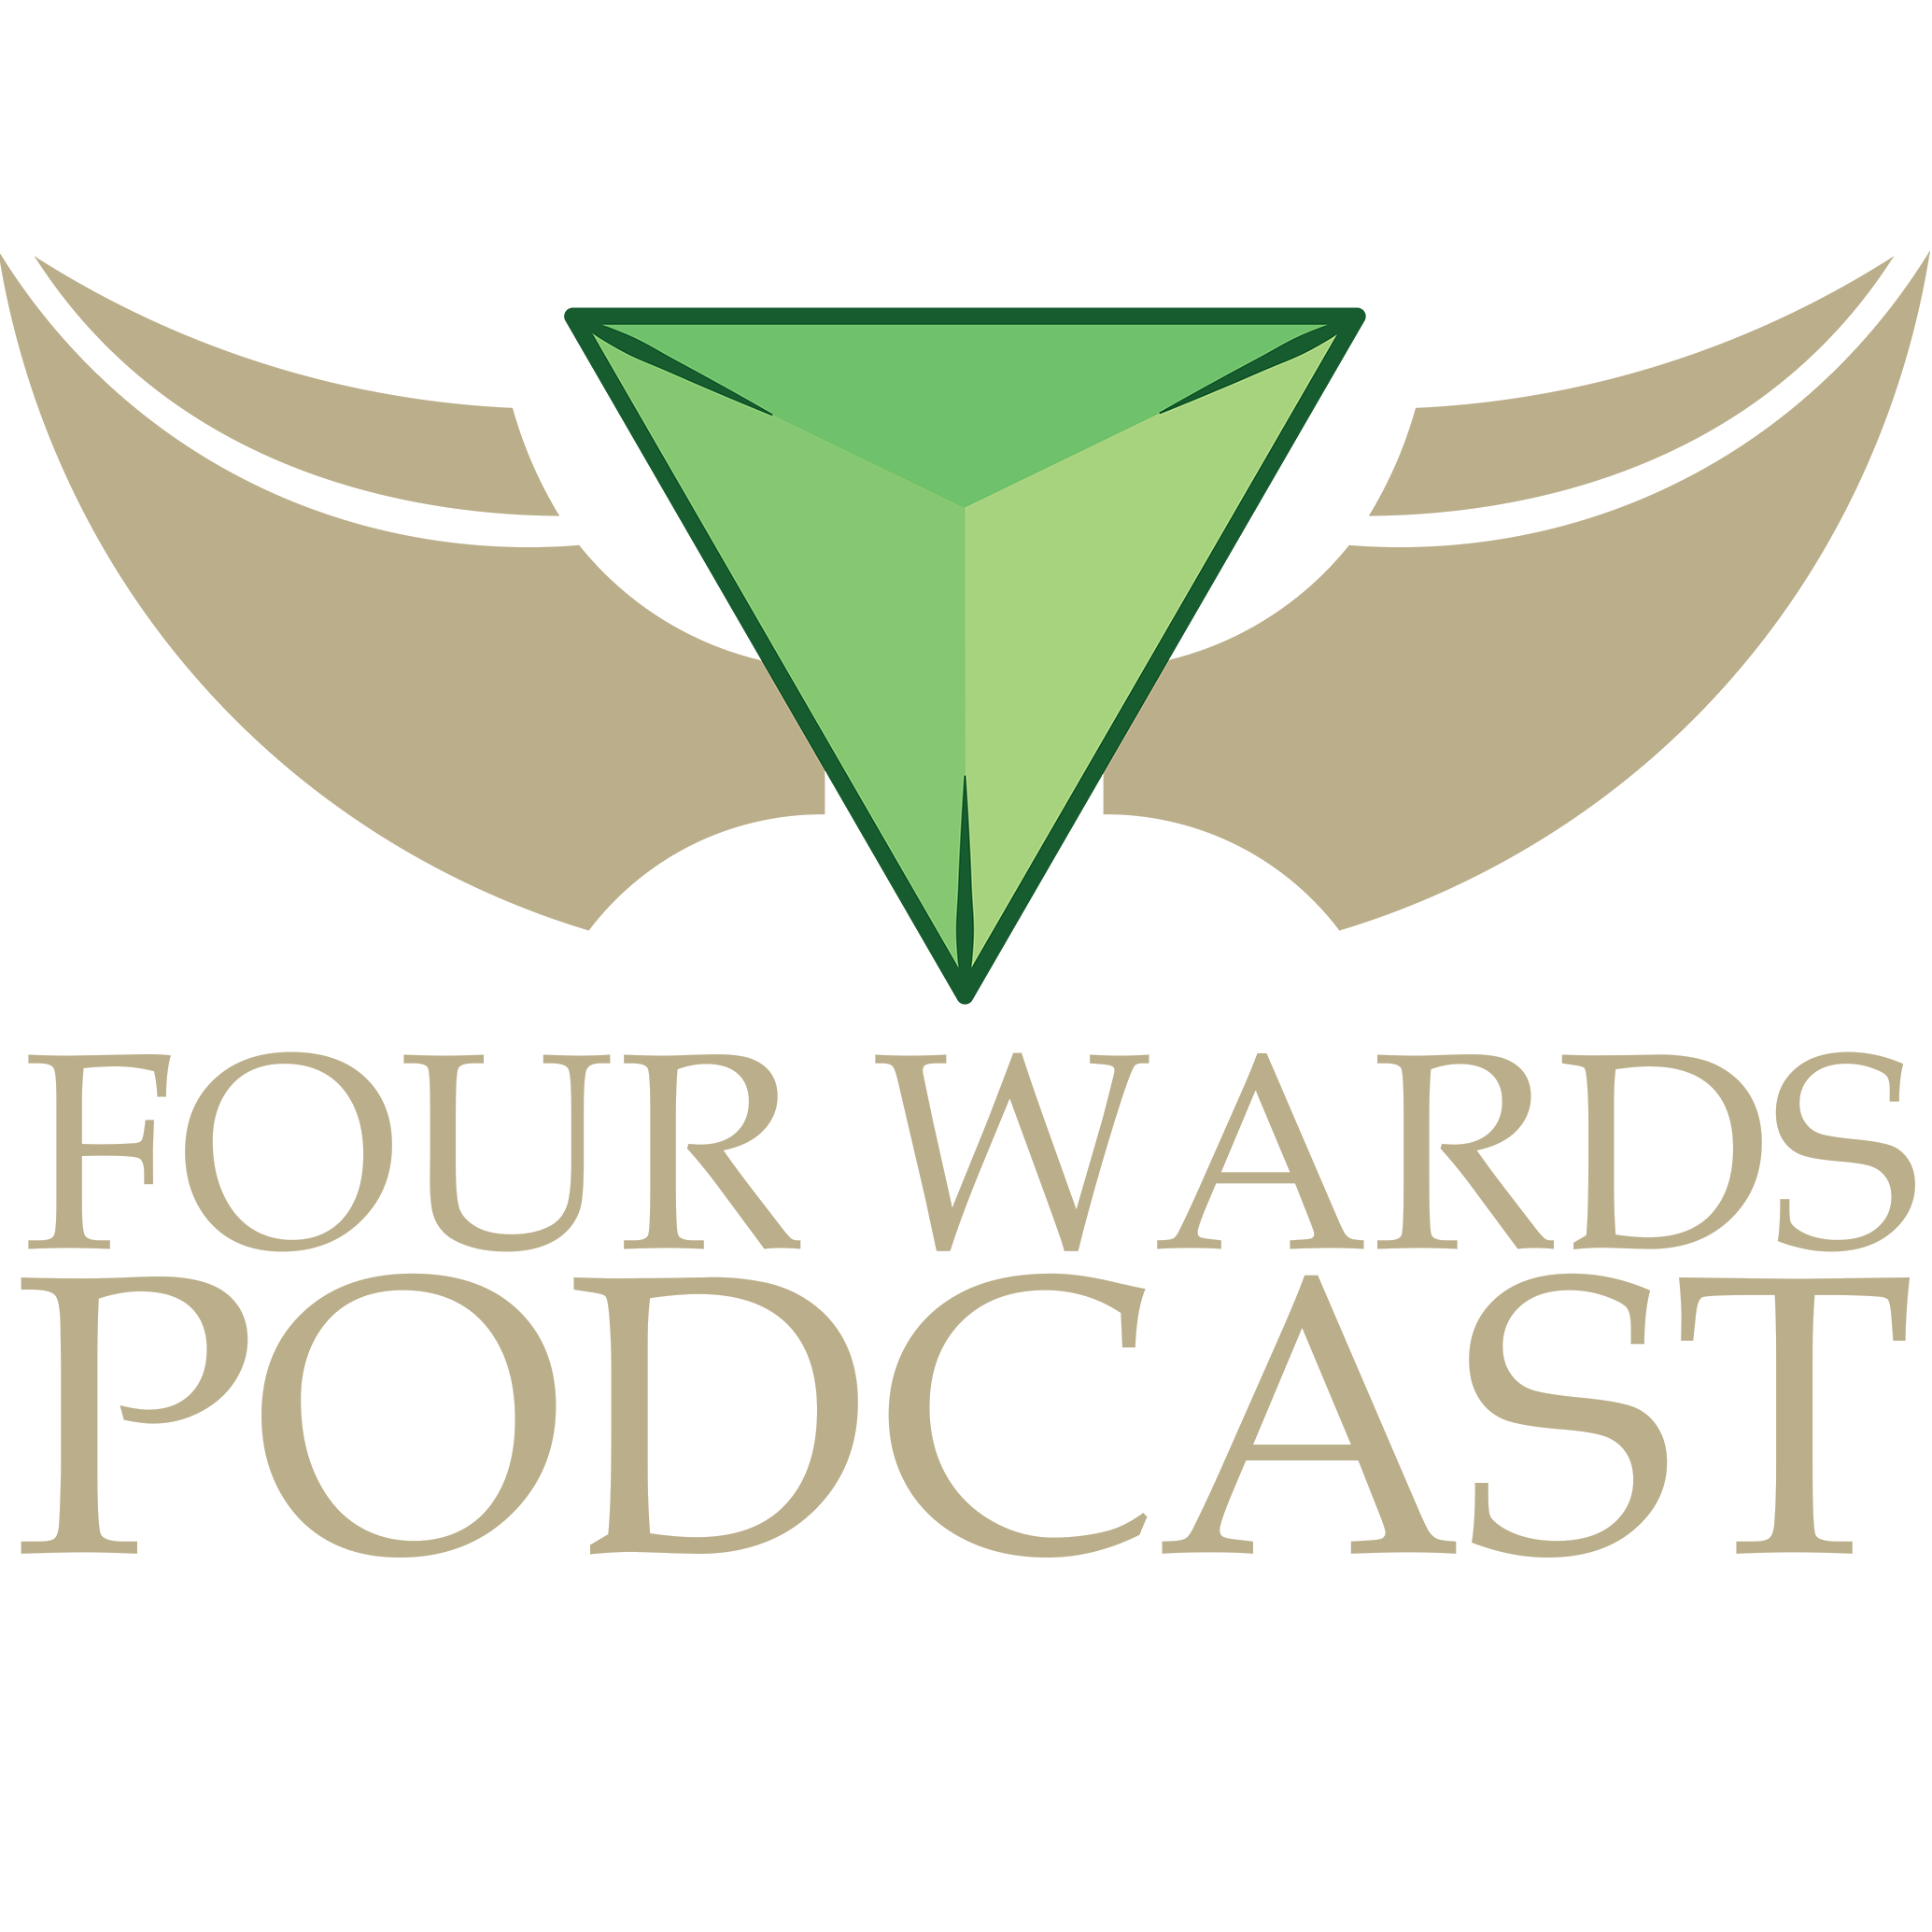 The Four Wards Podcast - Episode 432: A Farewell to Otts